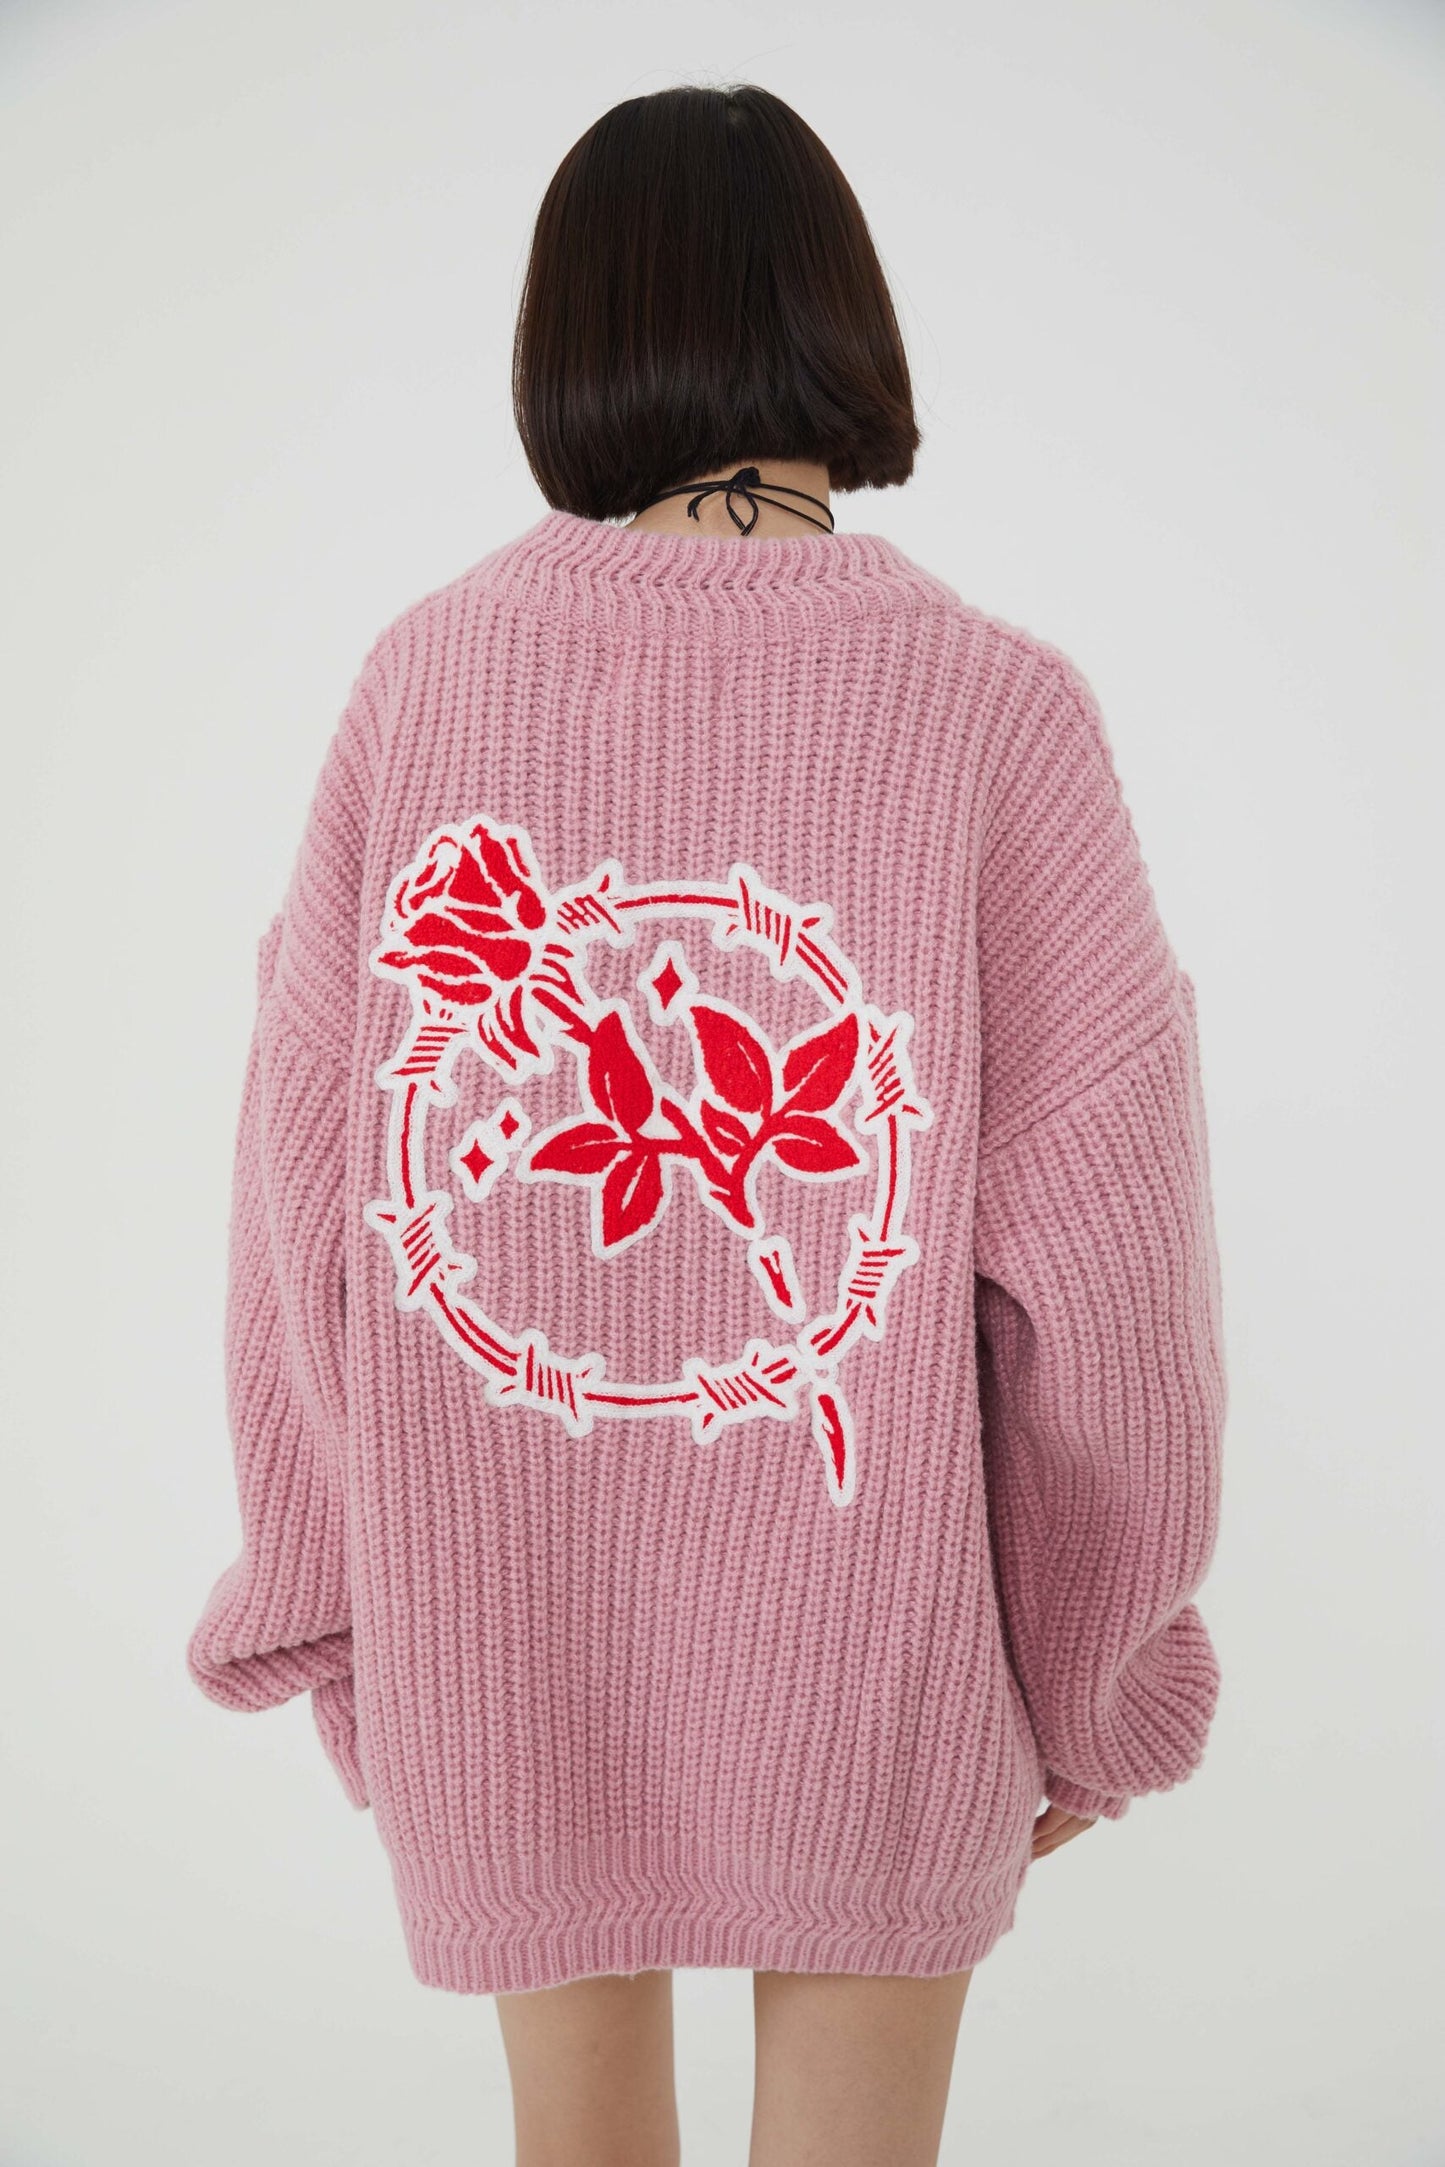 ROSES WITH THORNS KNITWEAR